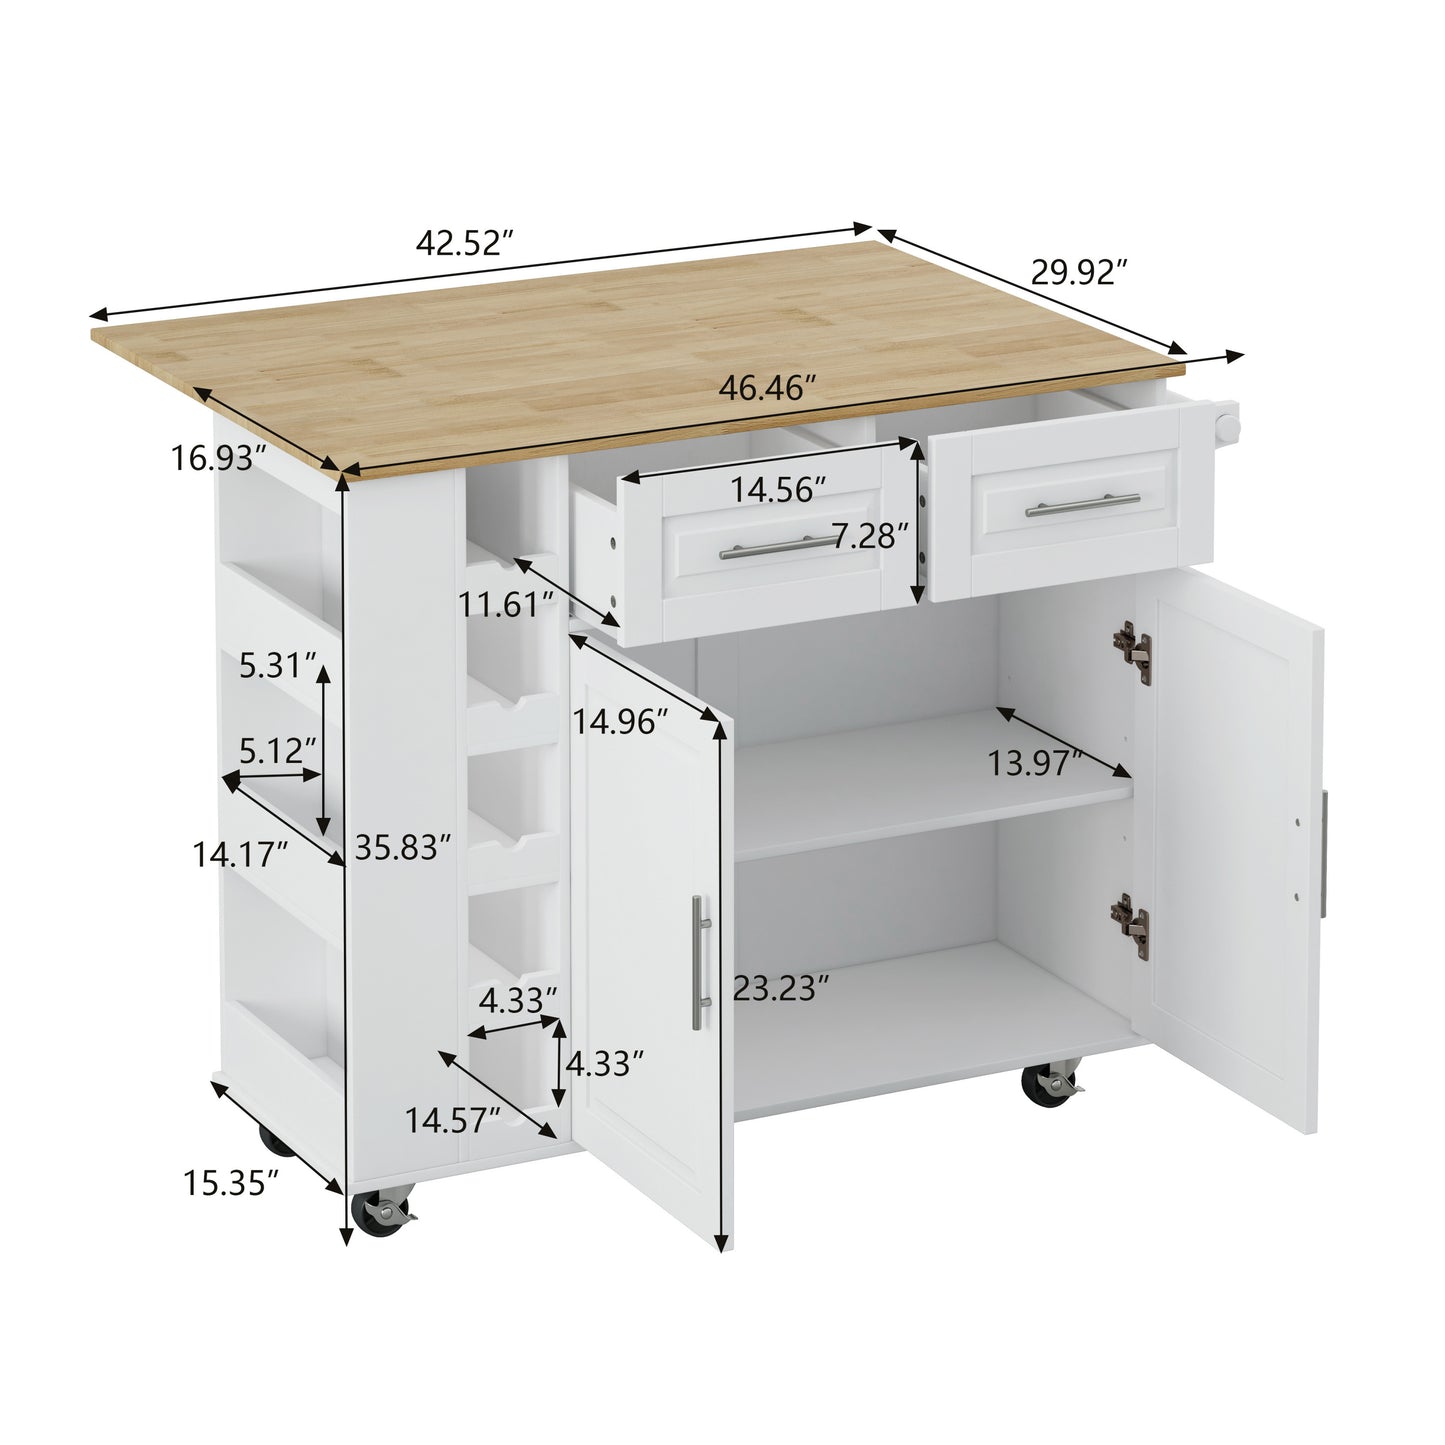 Multi-Functional Kitchen Island Cart with 2 Door Cabinet and Two Drawers,Spice Rack, Towel Holder, Wine Rack, and Foldable Rubberwood Table Top (White)